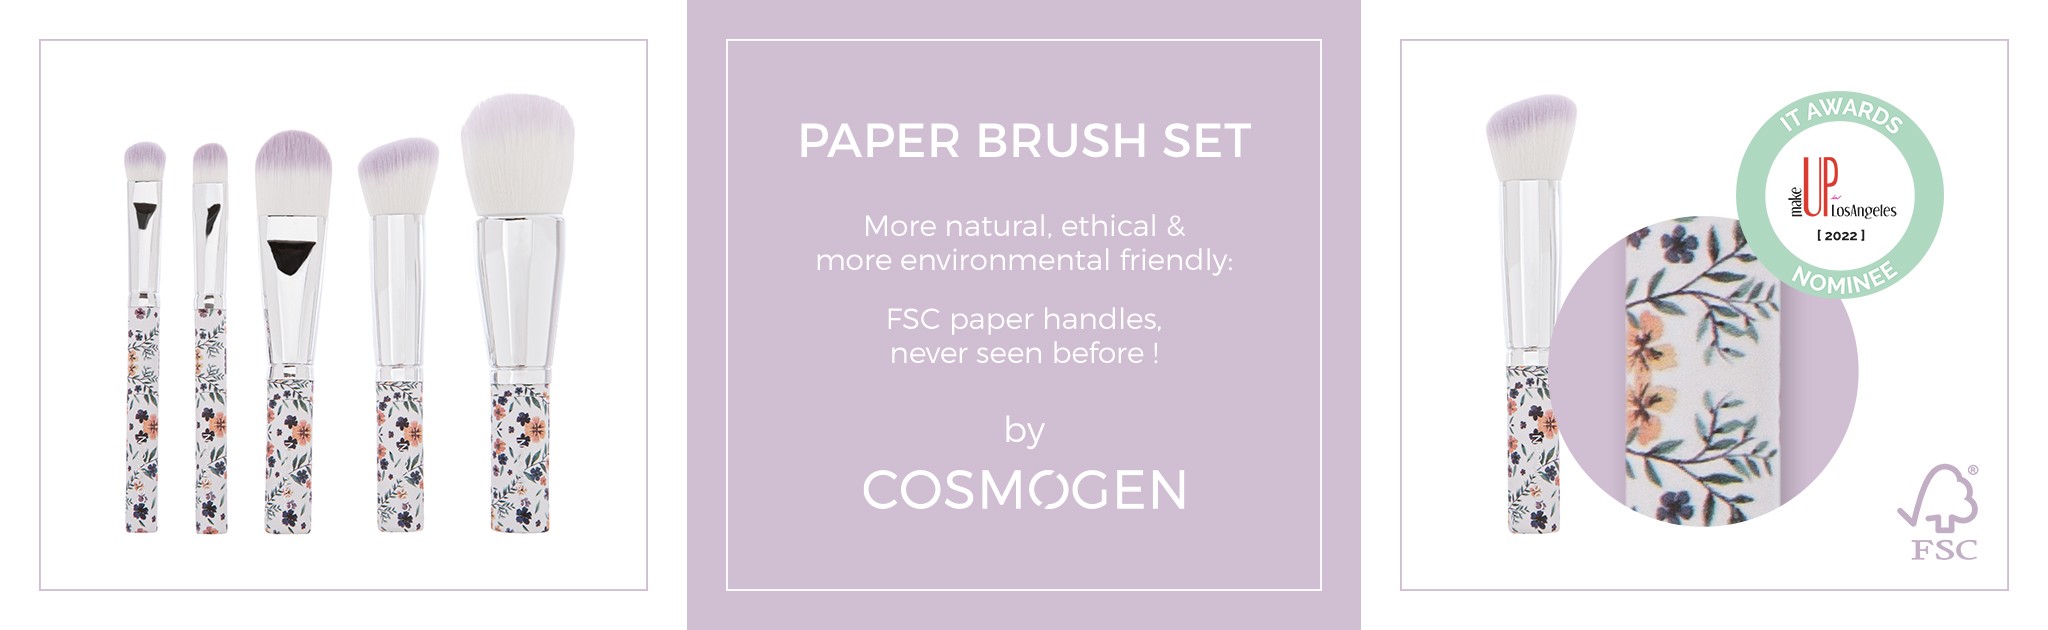 https://www.cosmogen.fr/paper-bruh-set.html?search_query=PAPER+BRUSH+SET&results=1